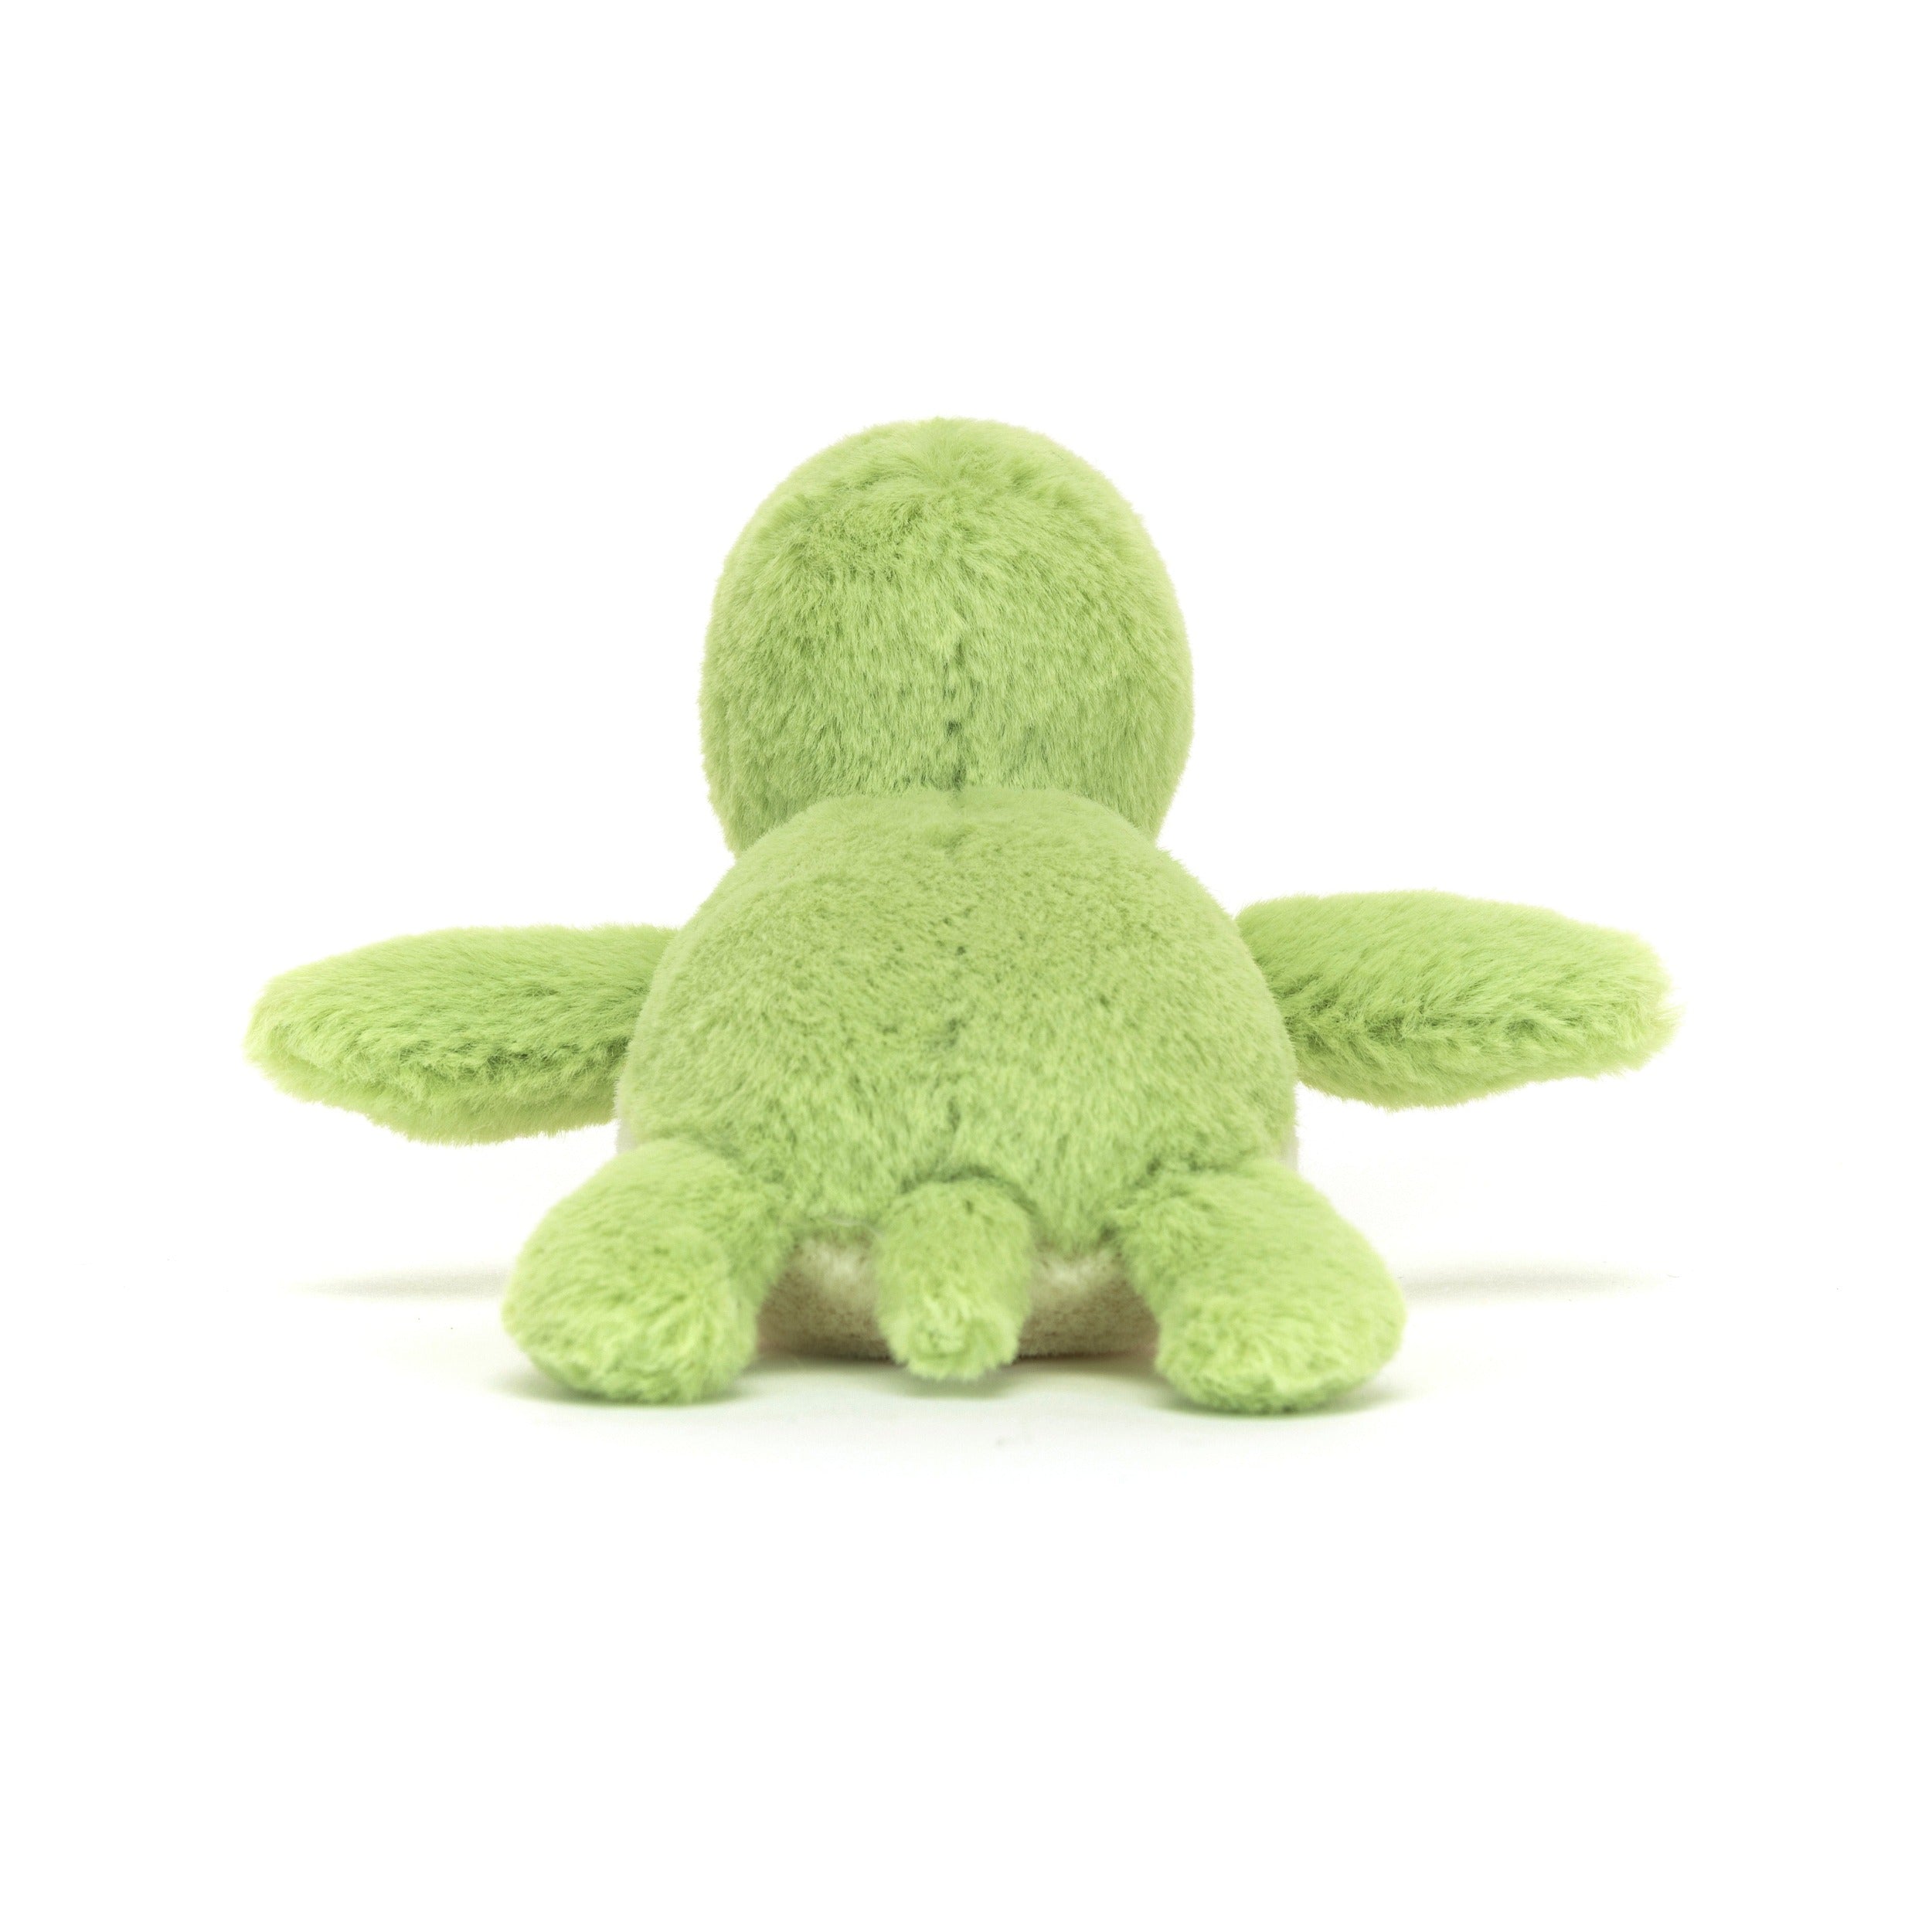 Fluffy Frog Jellycat at Taylor and Max. A small pocket friend that is discreet and fits well in a pocket or jacket. 